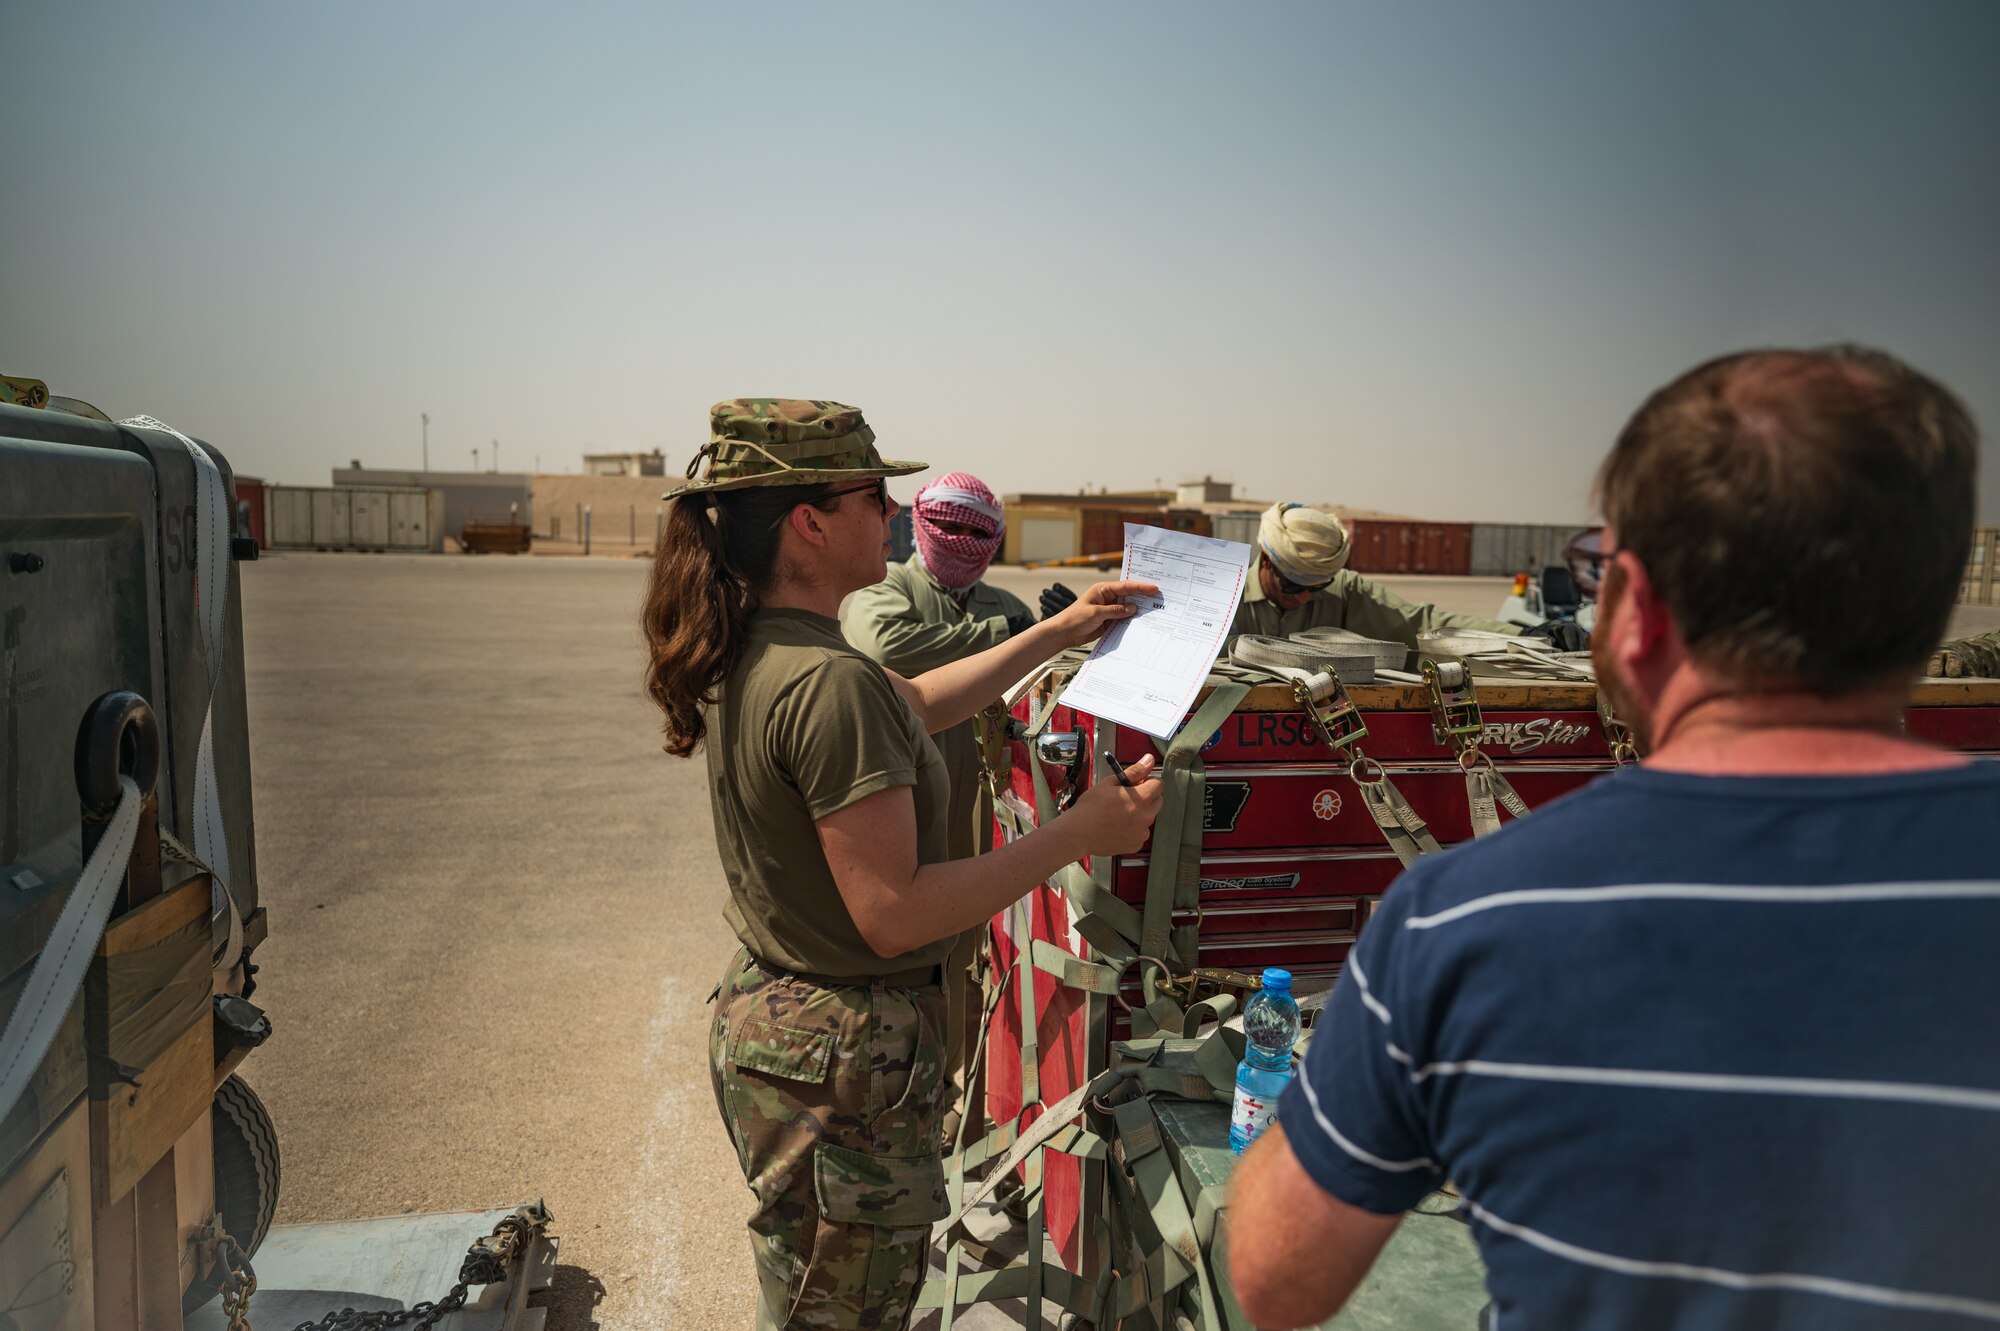 U.S. Air Force Staff Sgt. Miranda Shaw, forward deployed from the 379th Air Expeditionary Logistics Readiness Squadron, Al Udeid Air Base, Qatar, signs for outbound cargo in preparation for a departure flight during exercise Accurate Test 22 at Thumrait Air Base, Oman, May 22, 2022. Her inspections helped ensure that the cargo was properly inspected and marked for shipment to its intended destination. (U.S. Air Force photo by Staff Sgt. Dana Tourtellotte)